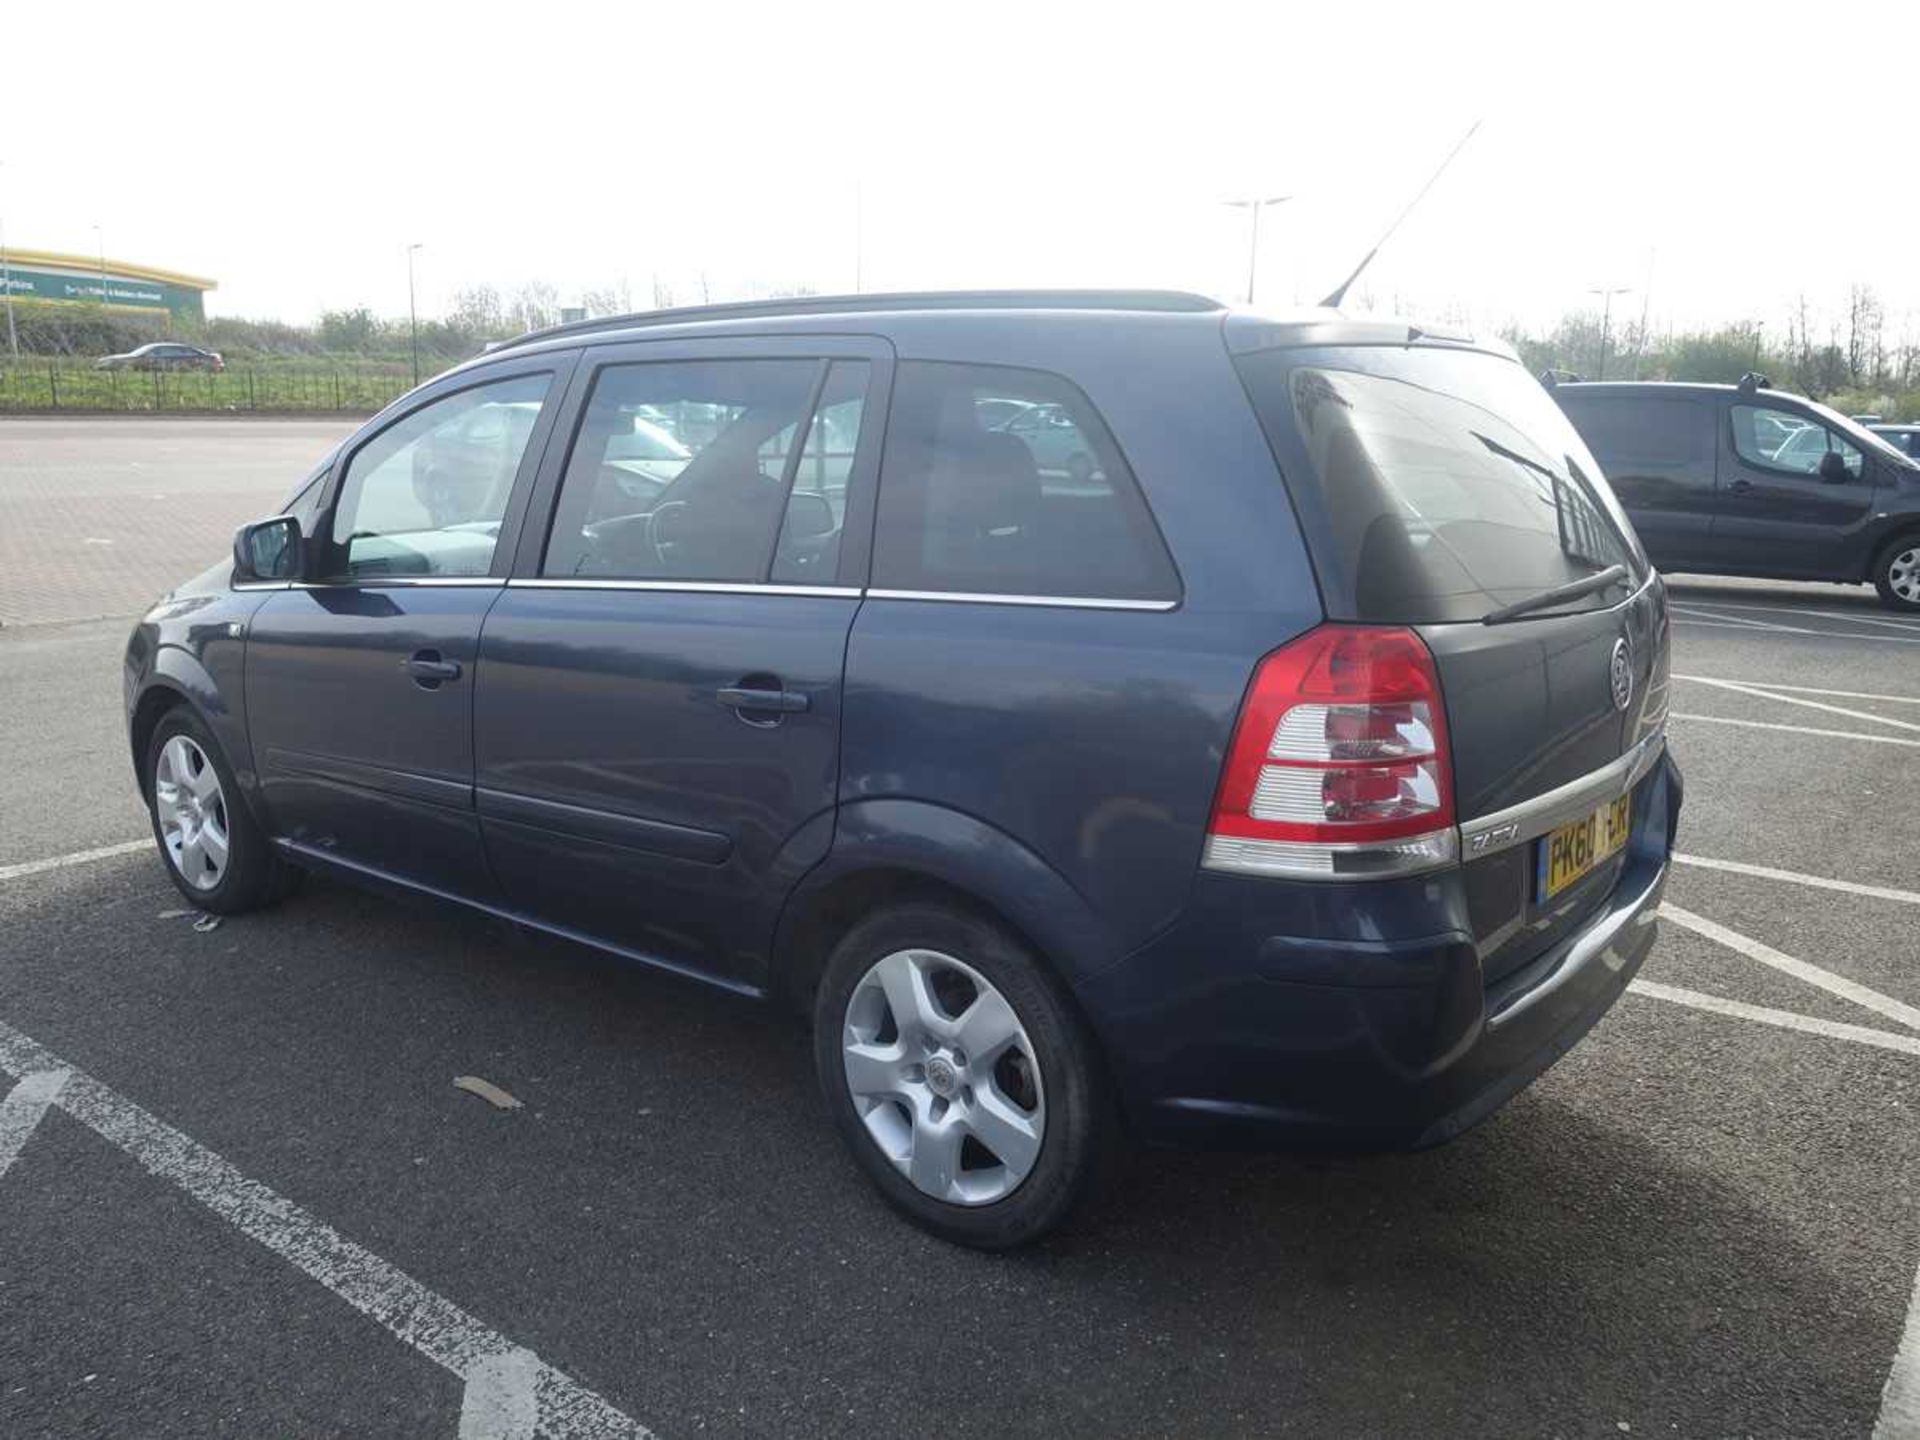 (PK60 YCR) Vauxhall Zafira Exclusiv CDTI auto in blue, first registered 29/12/2010, MPV, - Image 4 of 10